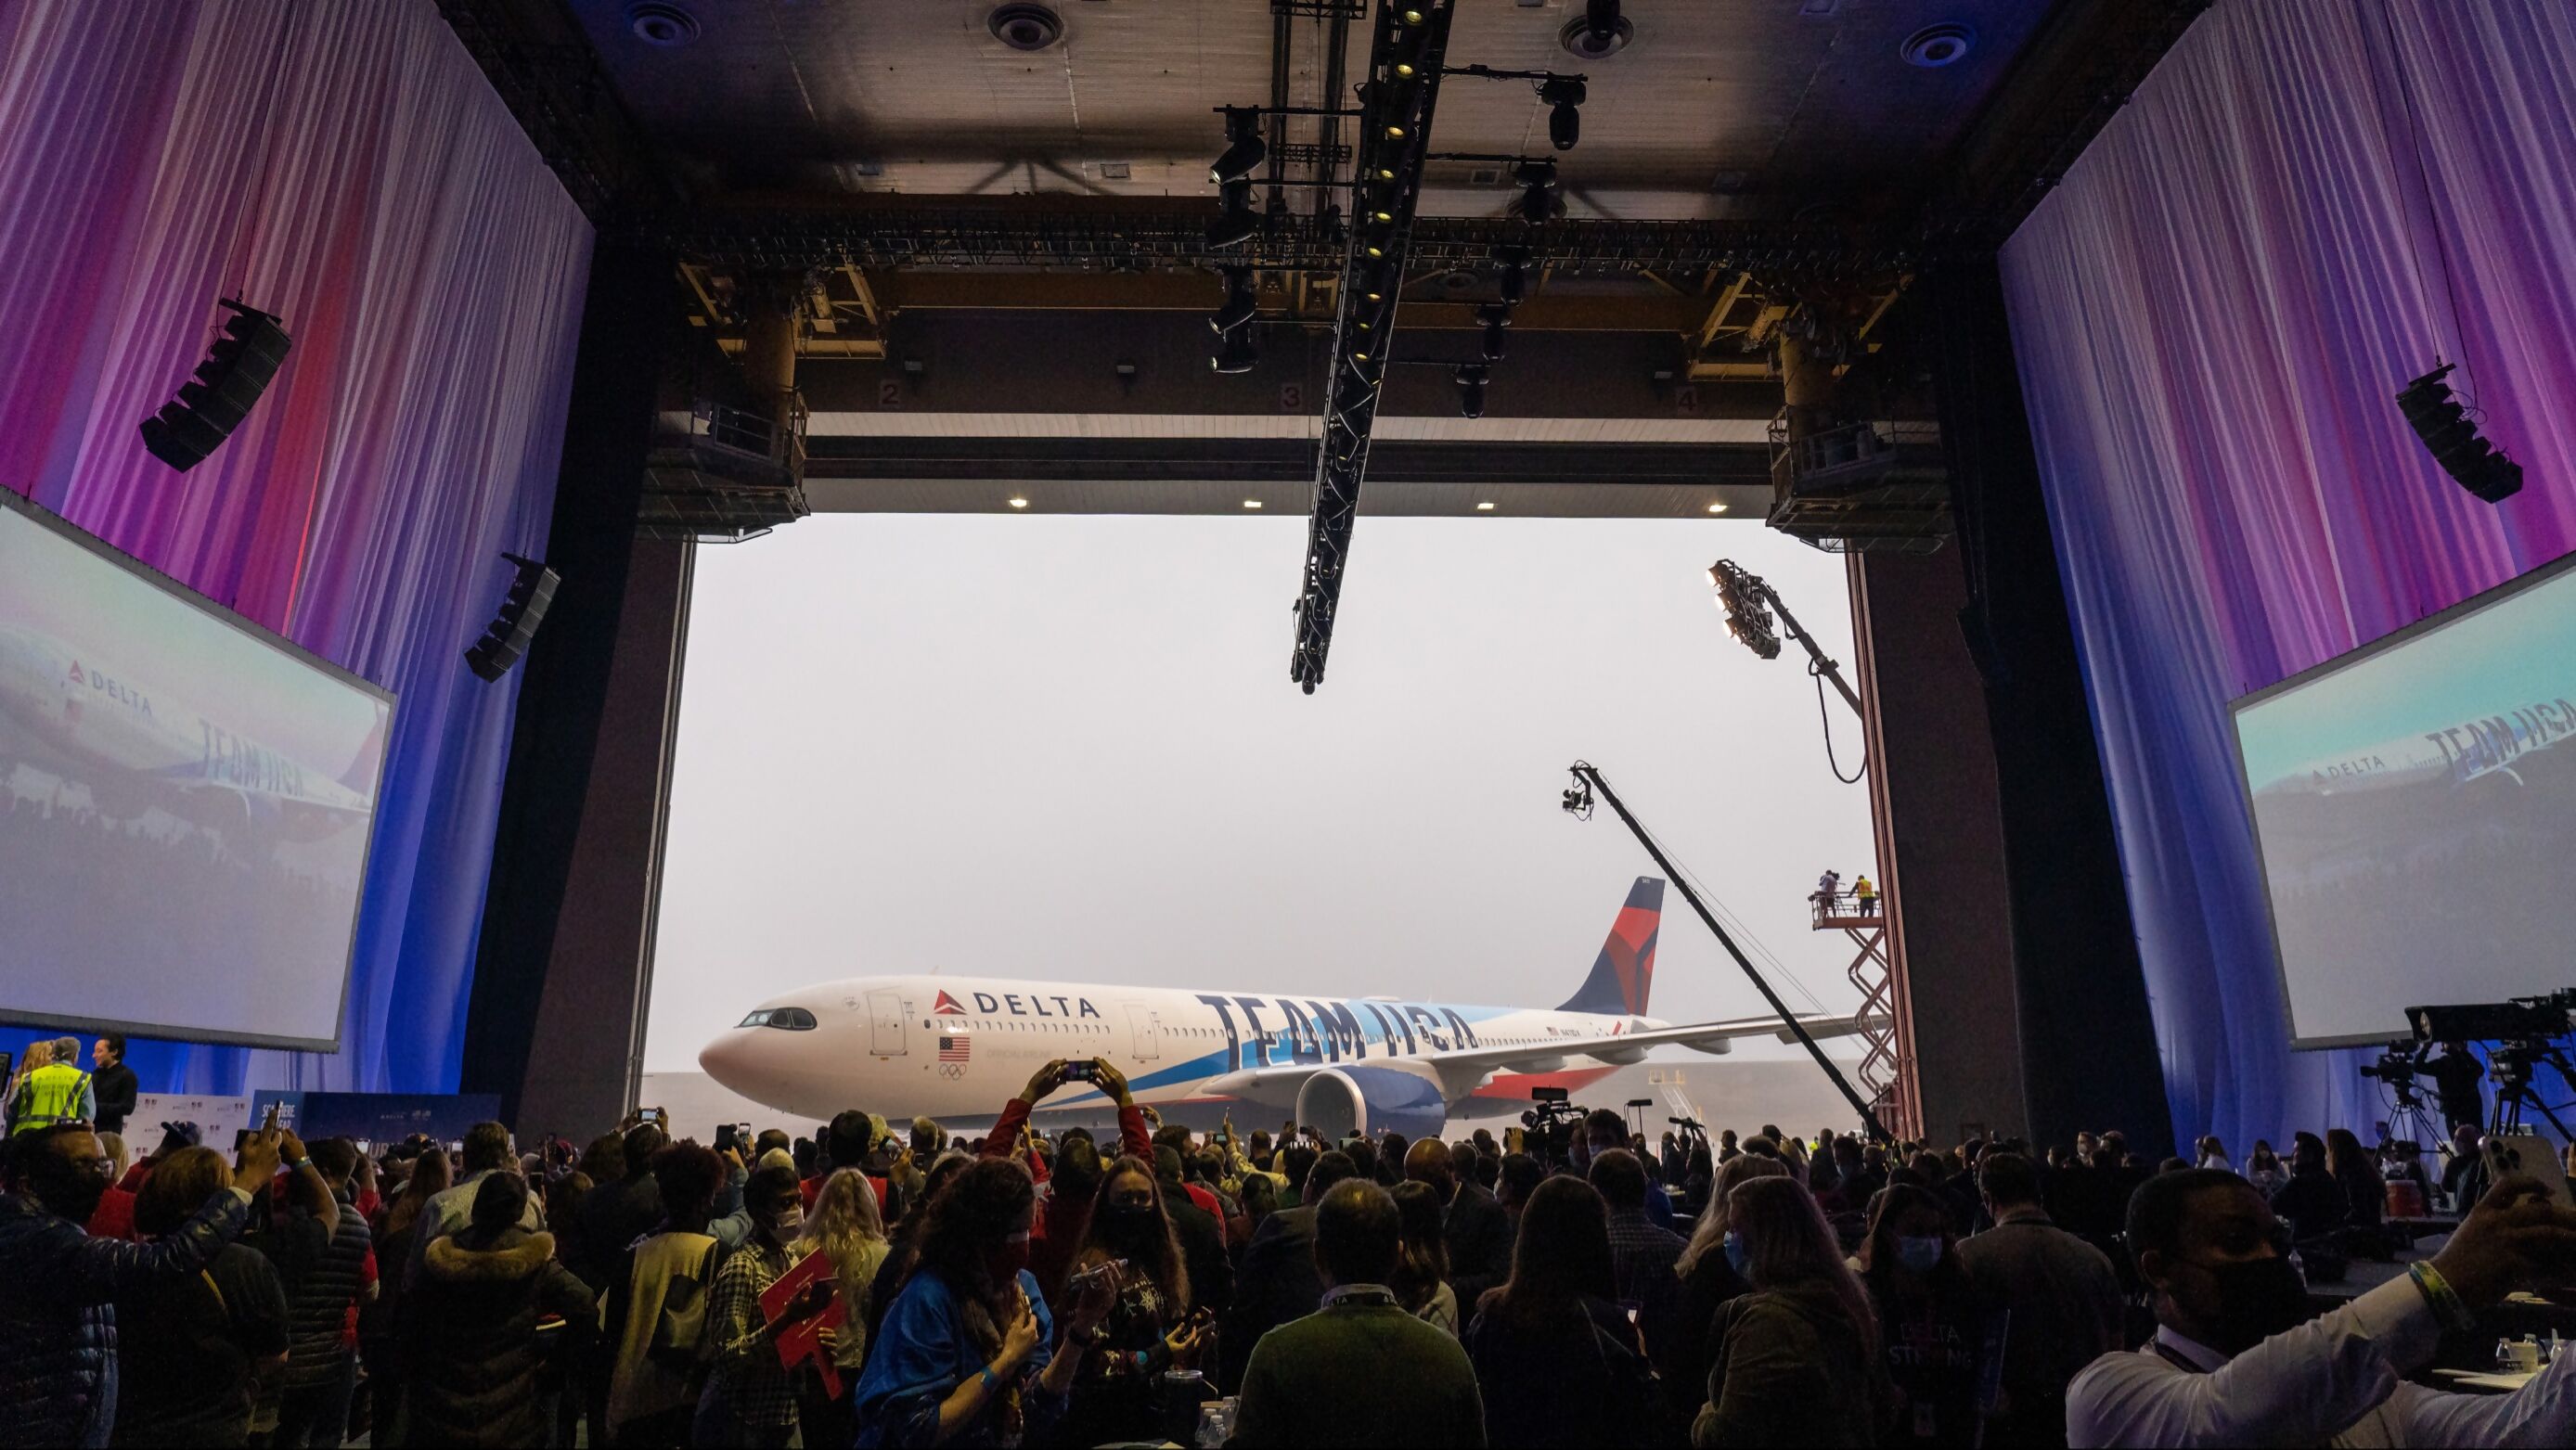 Delta unveils custom aircraft livery to celebrate 8-year commitment as official airline of Team USA